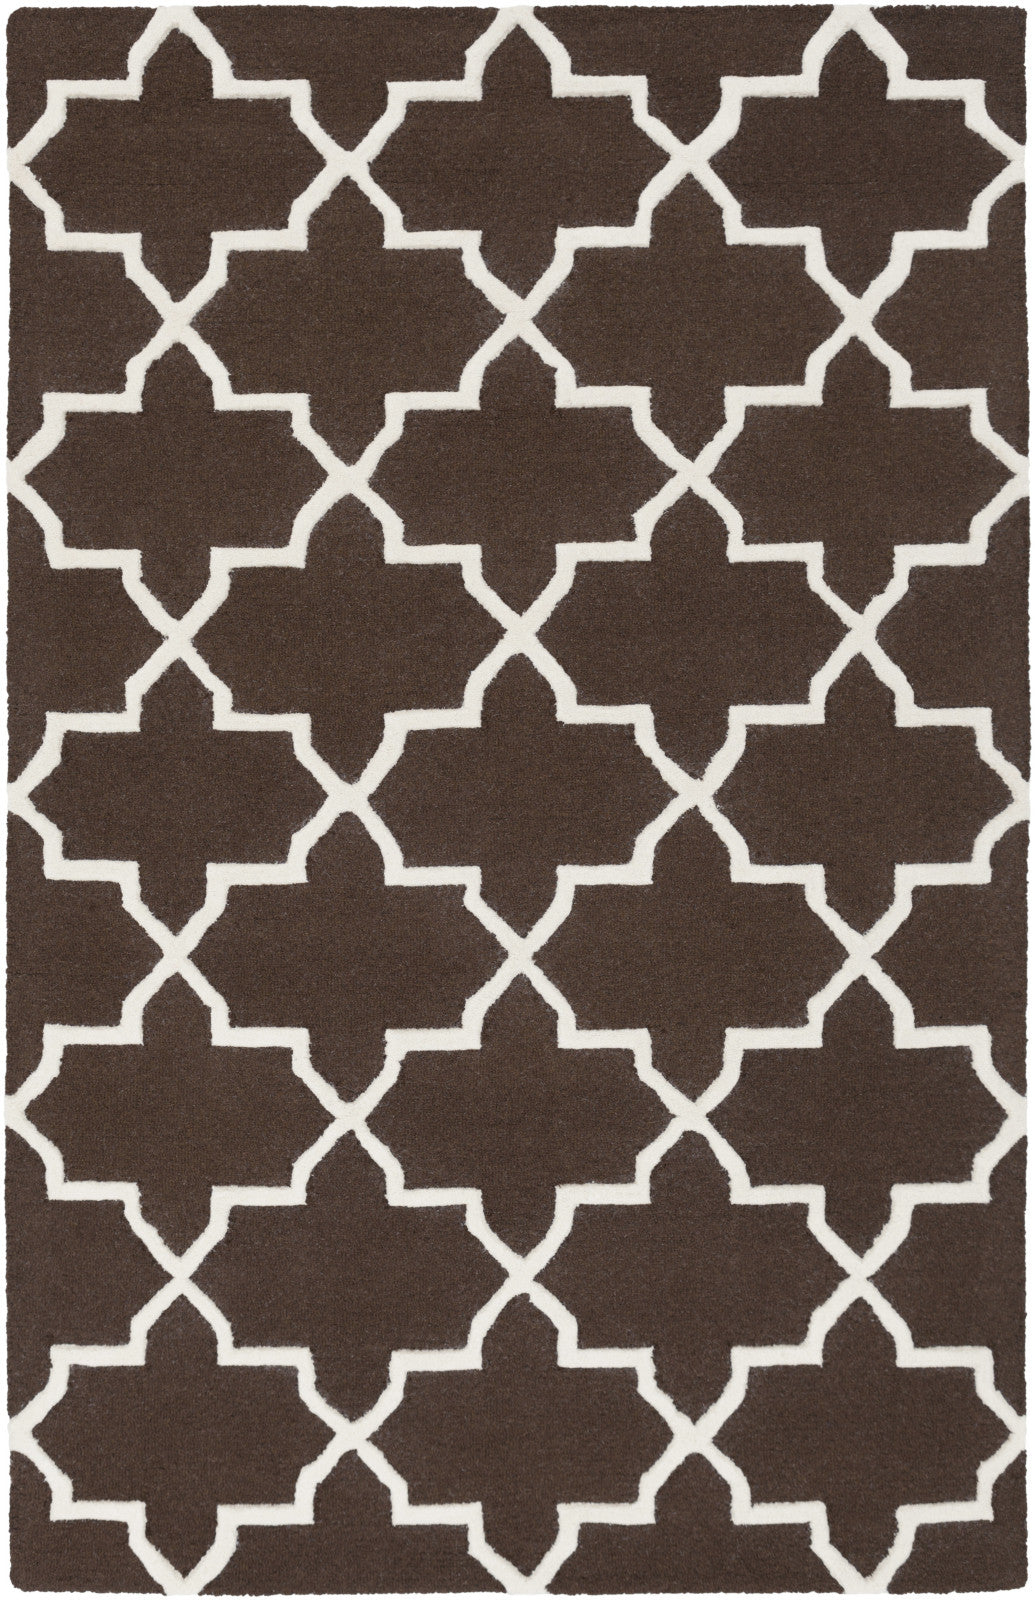 Artistic Weavers Pollack Keely Brown/Ivory Area Rug main image